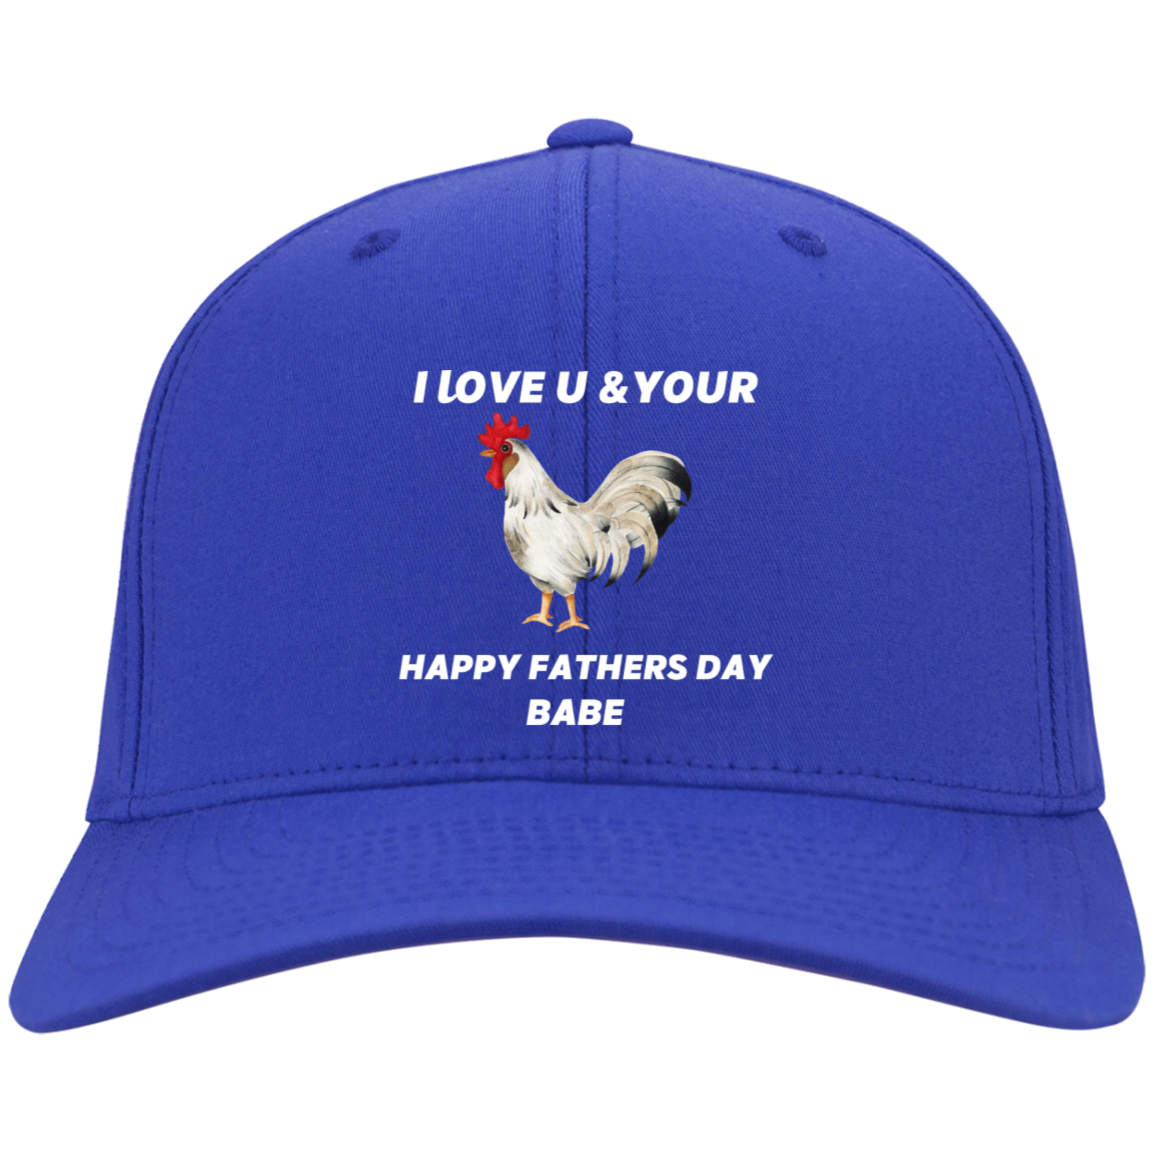 I LOVE YOU HAT